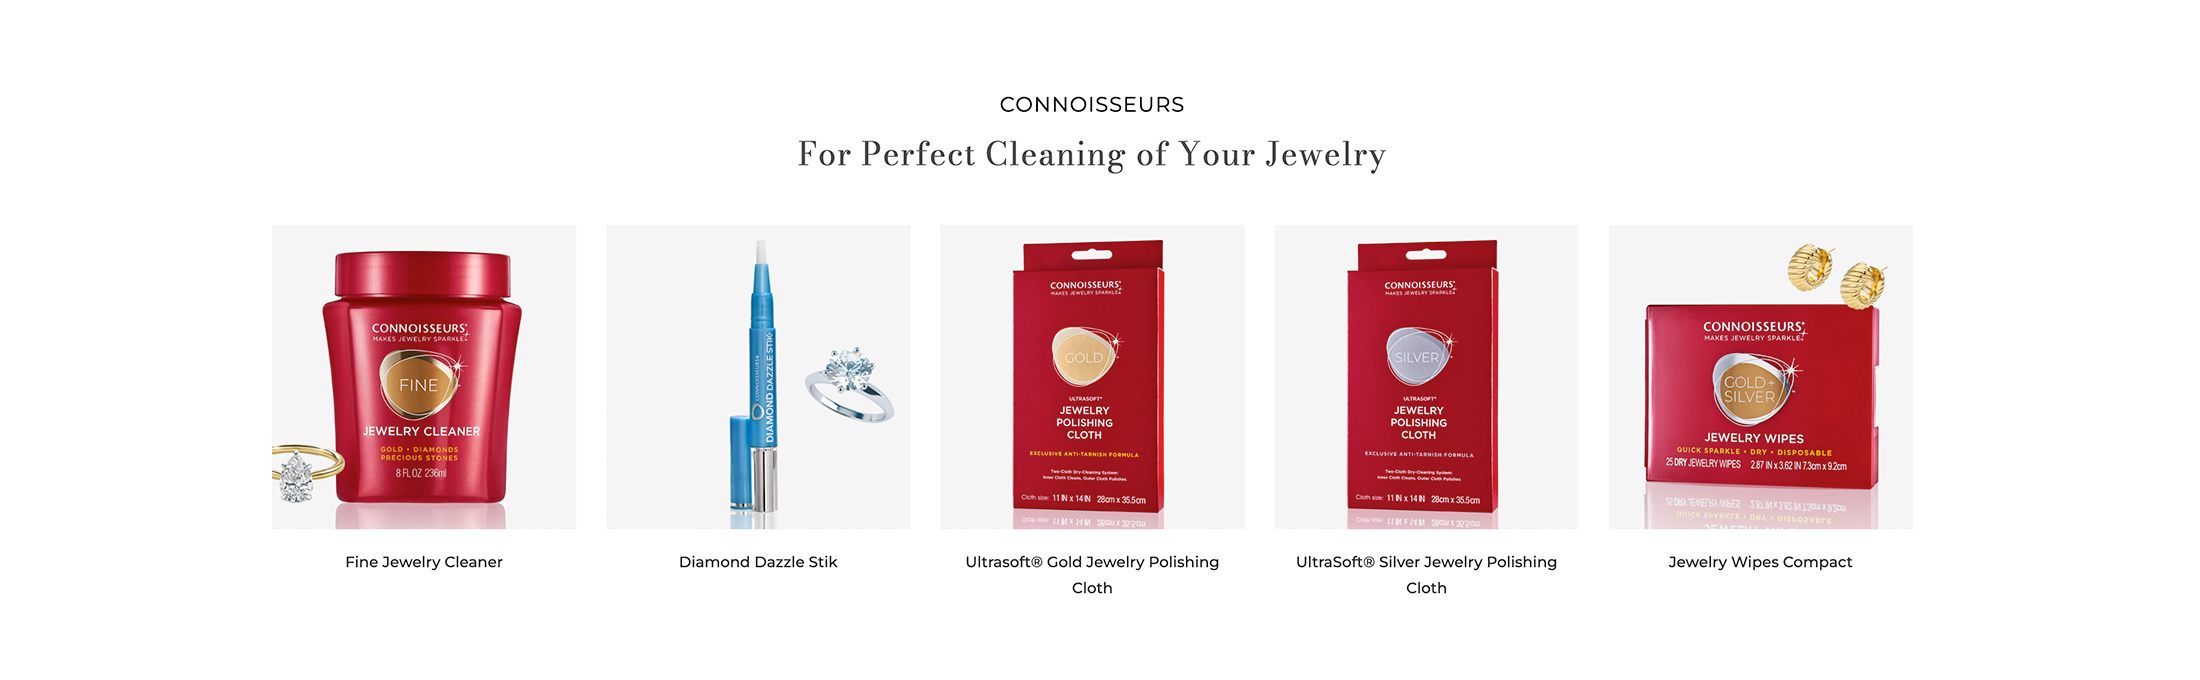 For Perfect Cleaning of Your Jewelry